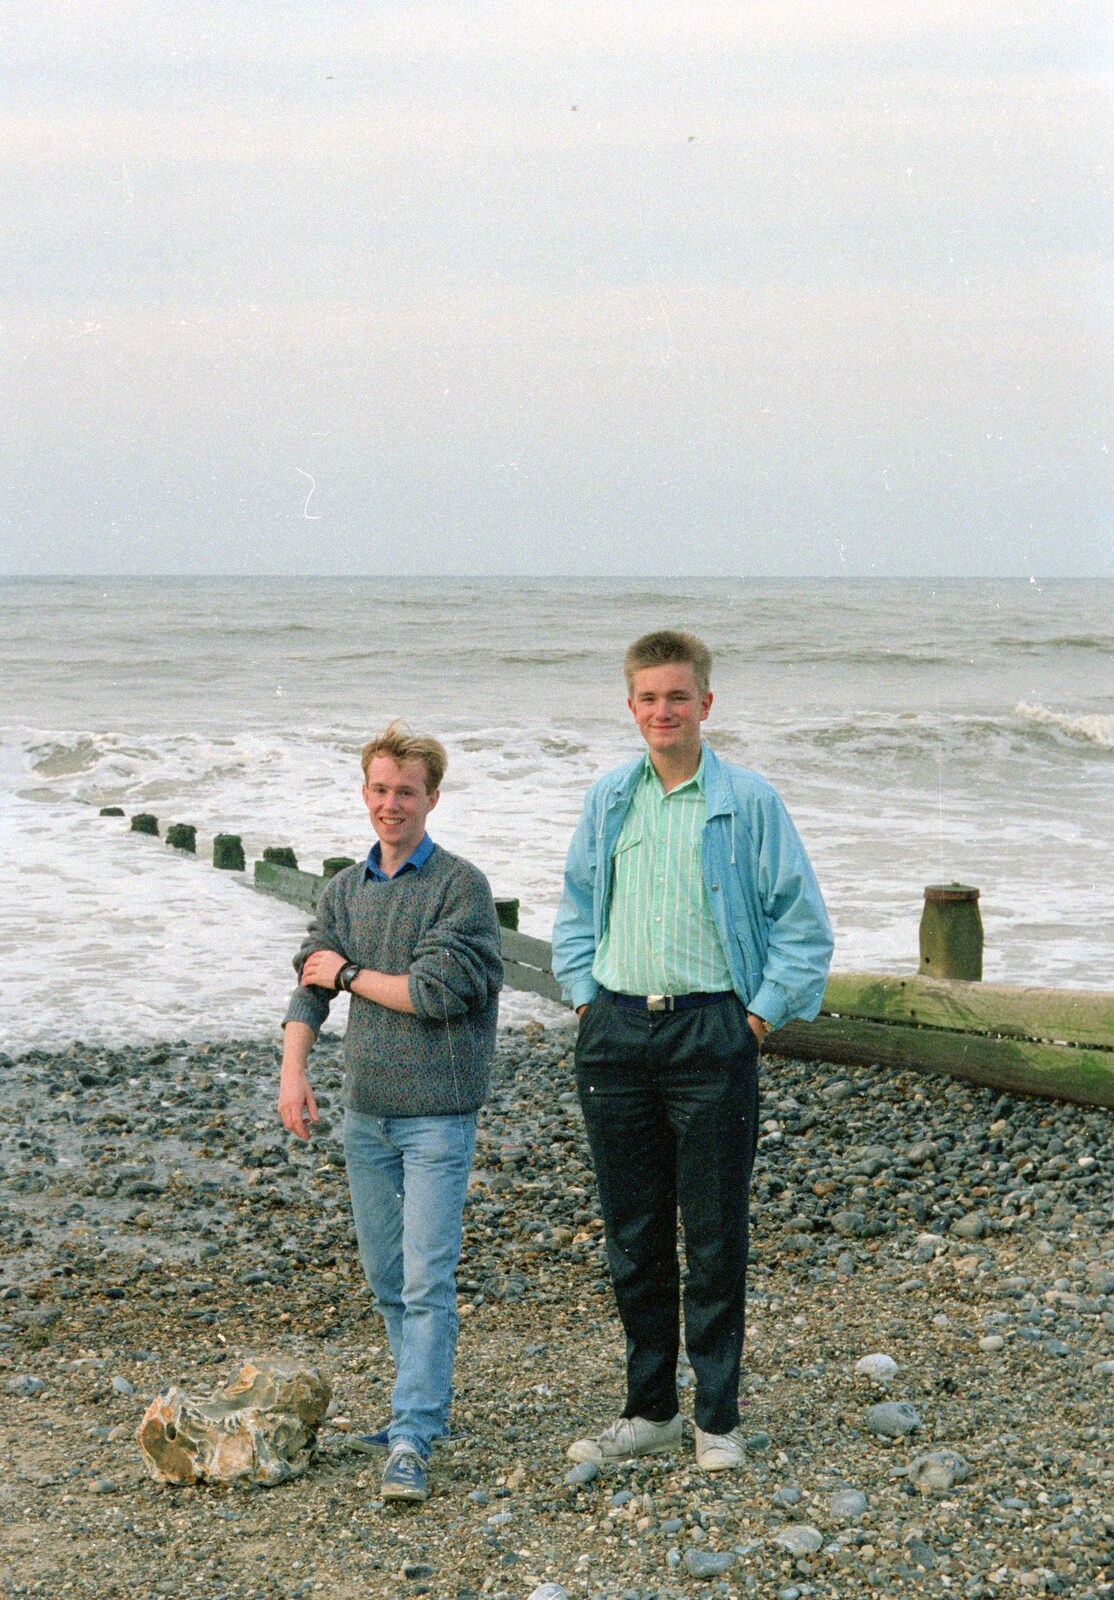 Martin and Nosher from A Trip to the Beach, East Runton, Norfolk - 6th July 1988